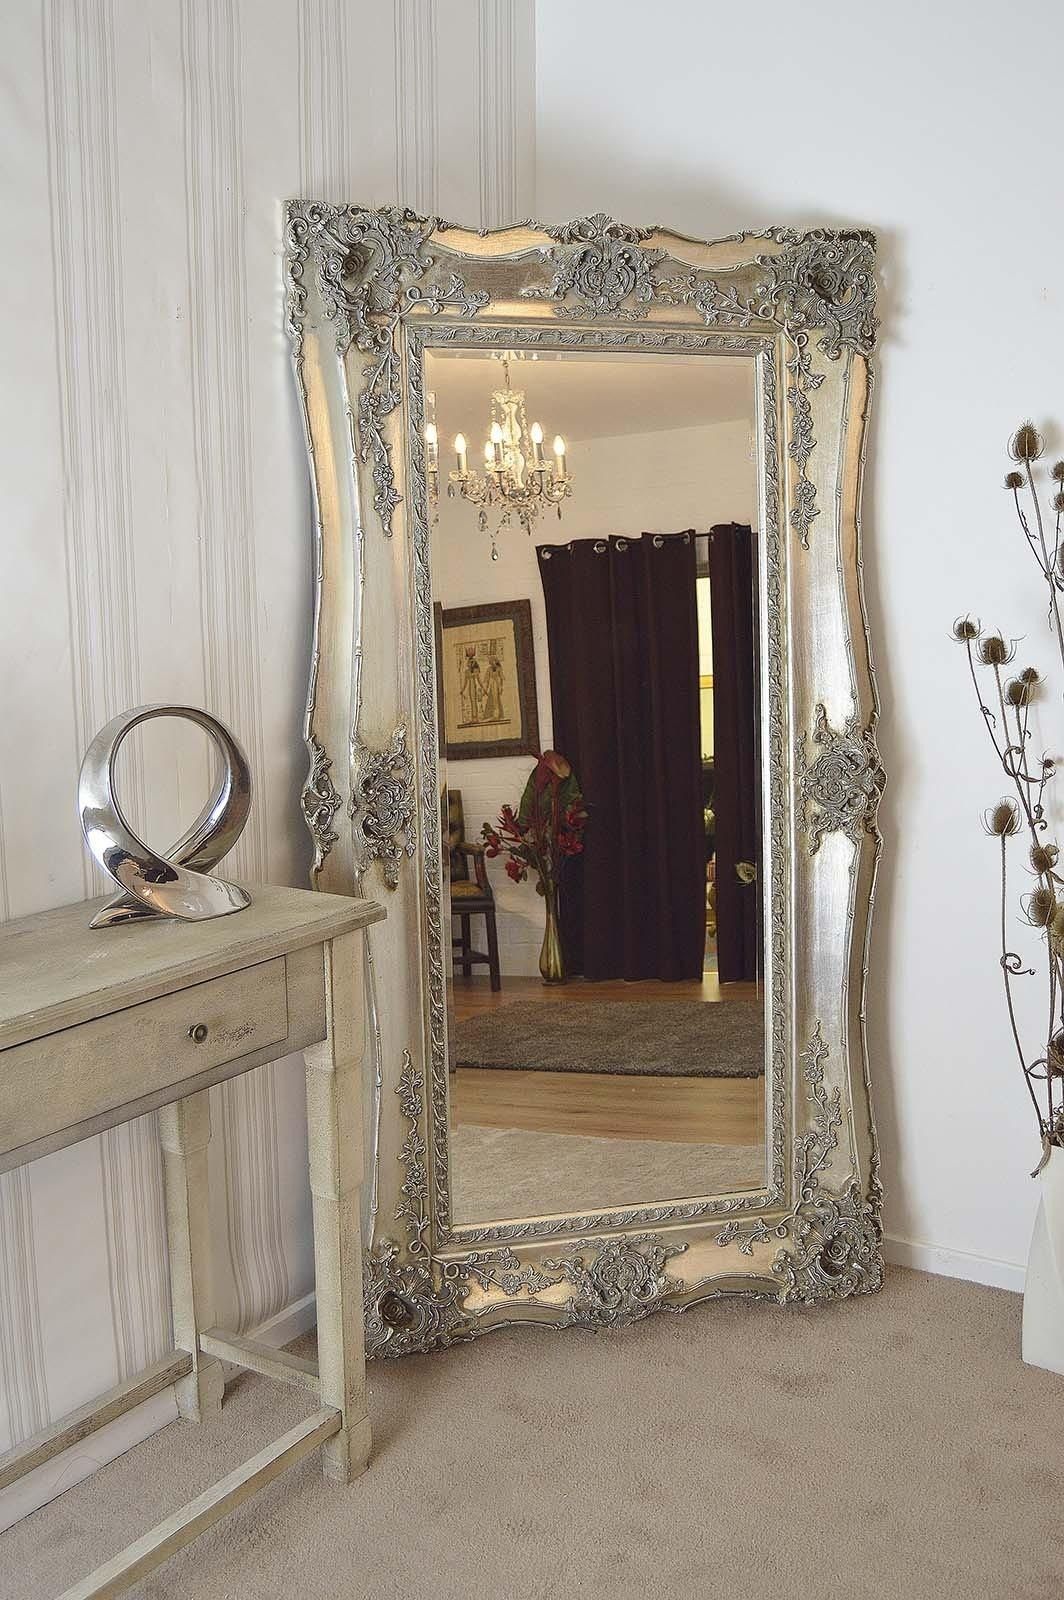 Homeware: Oval Full Length Standing Mirror | Large Floor Mirrors With Huge Mirrors Cheap (View 14 of 20)